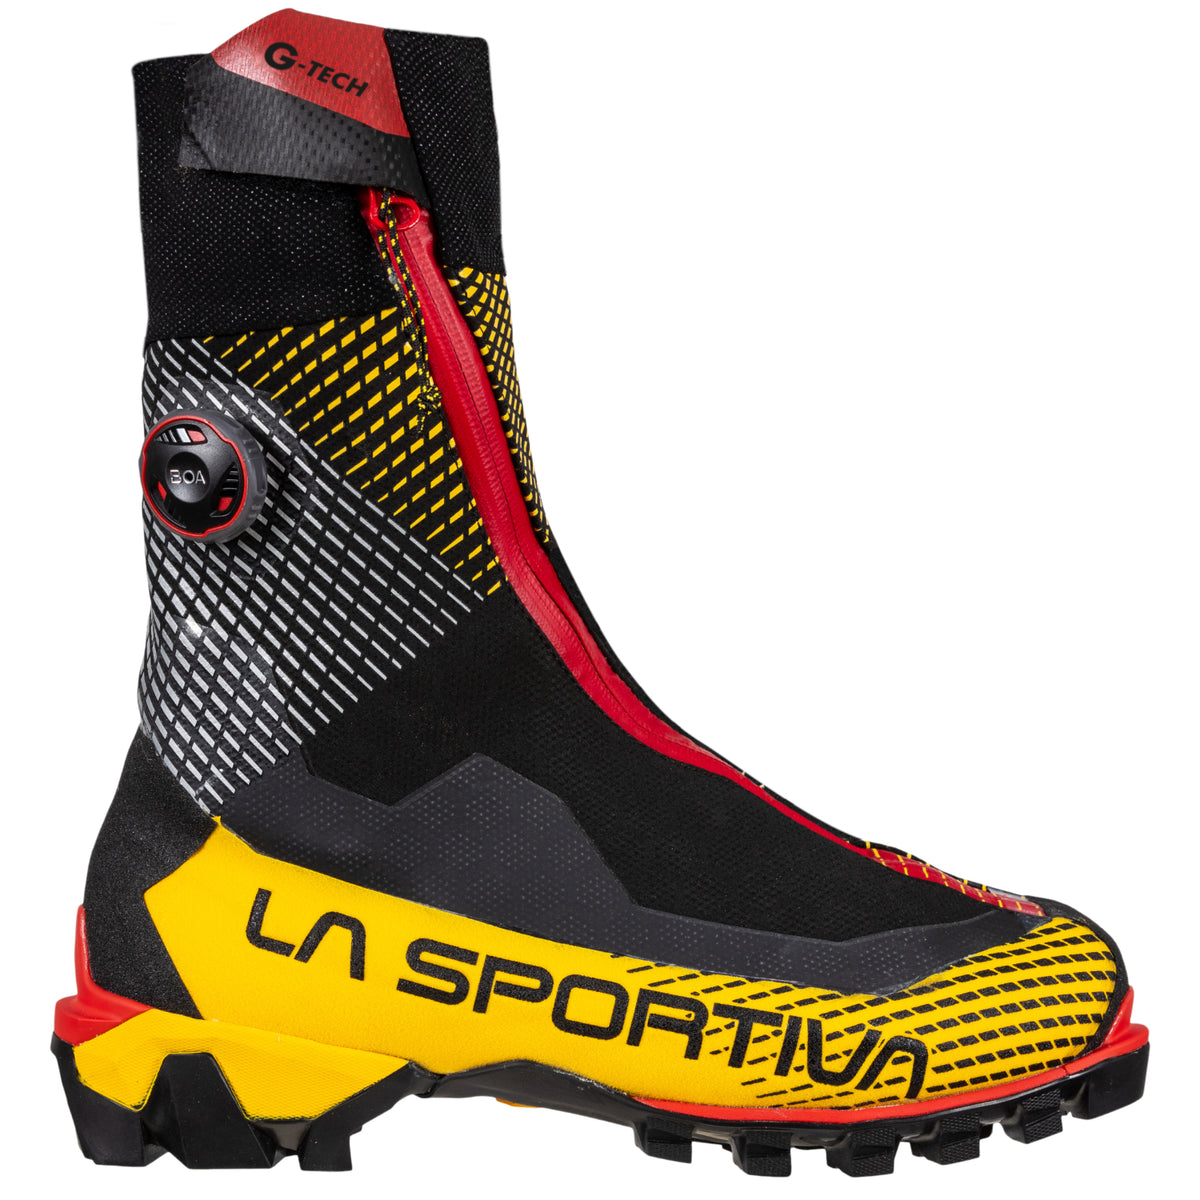 La Sportiva G-Tech mountaineering boots in black red and yellow, showing side on showing boa